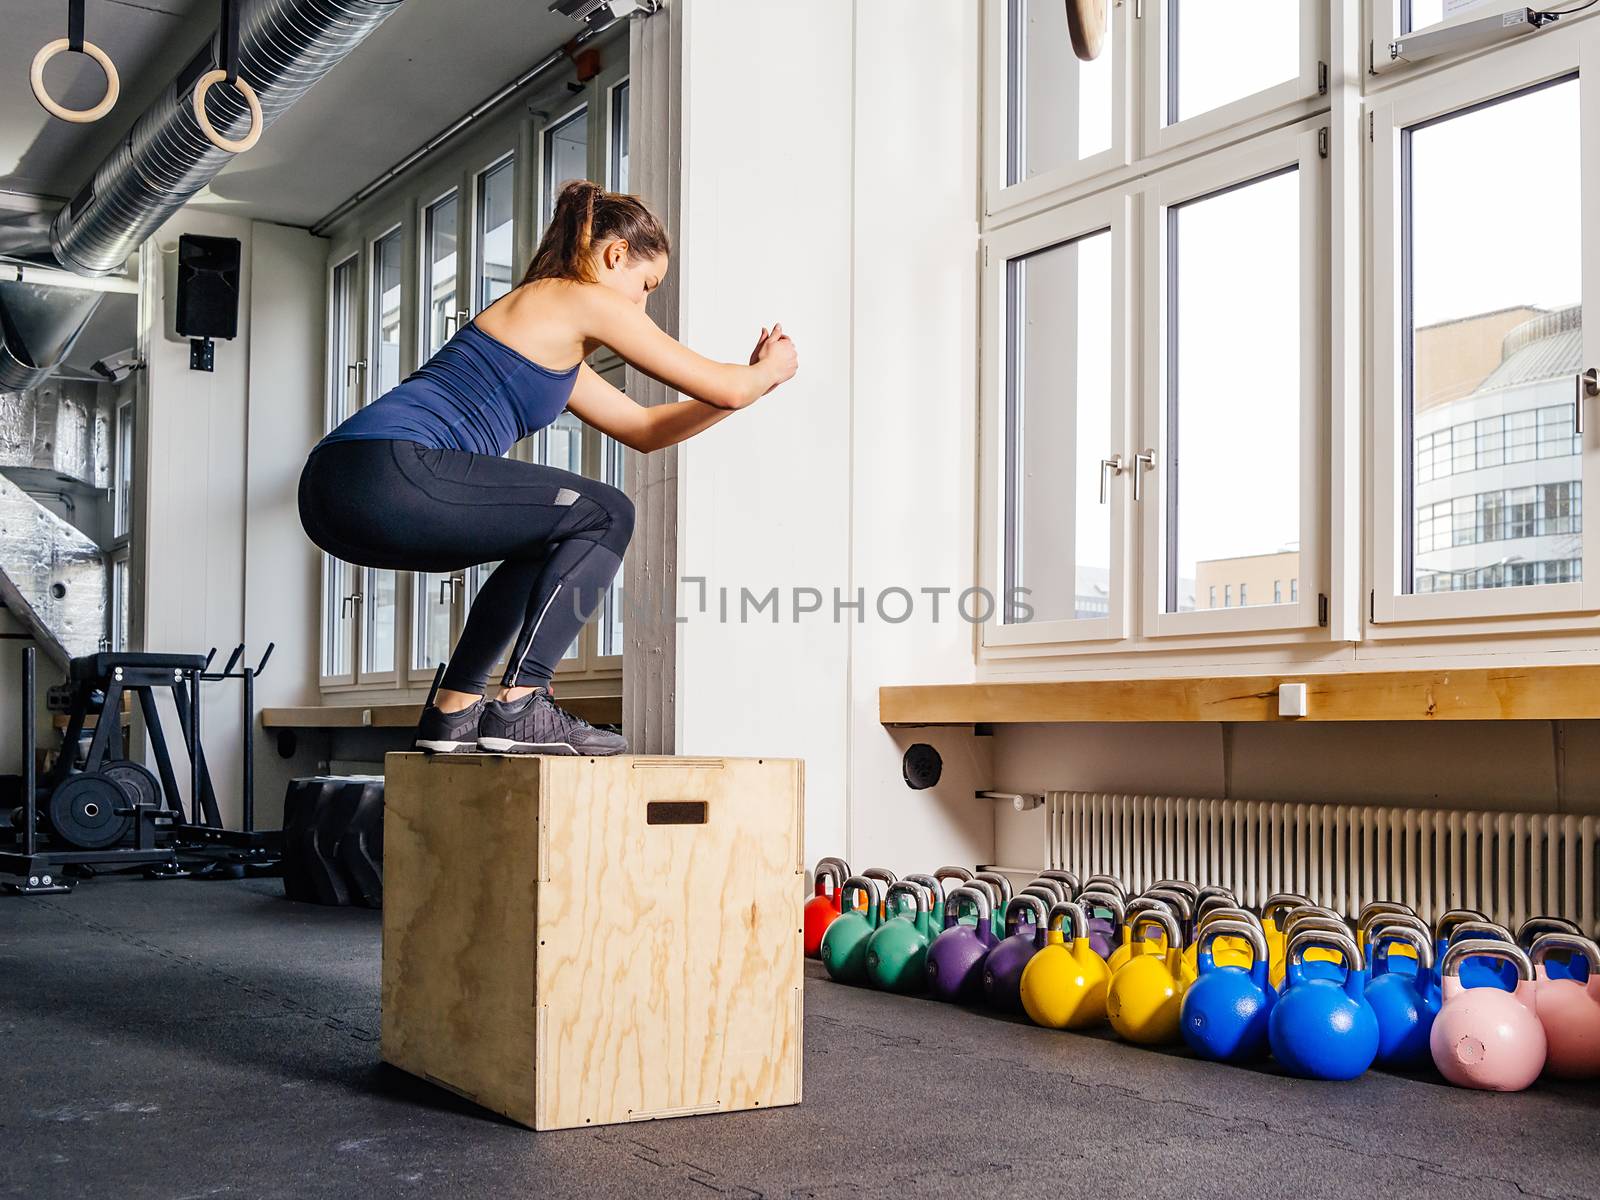 Box jump at the gym by sumners